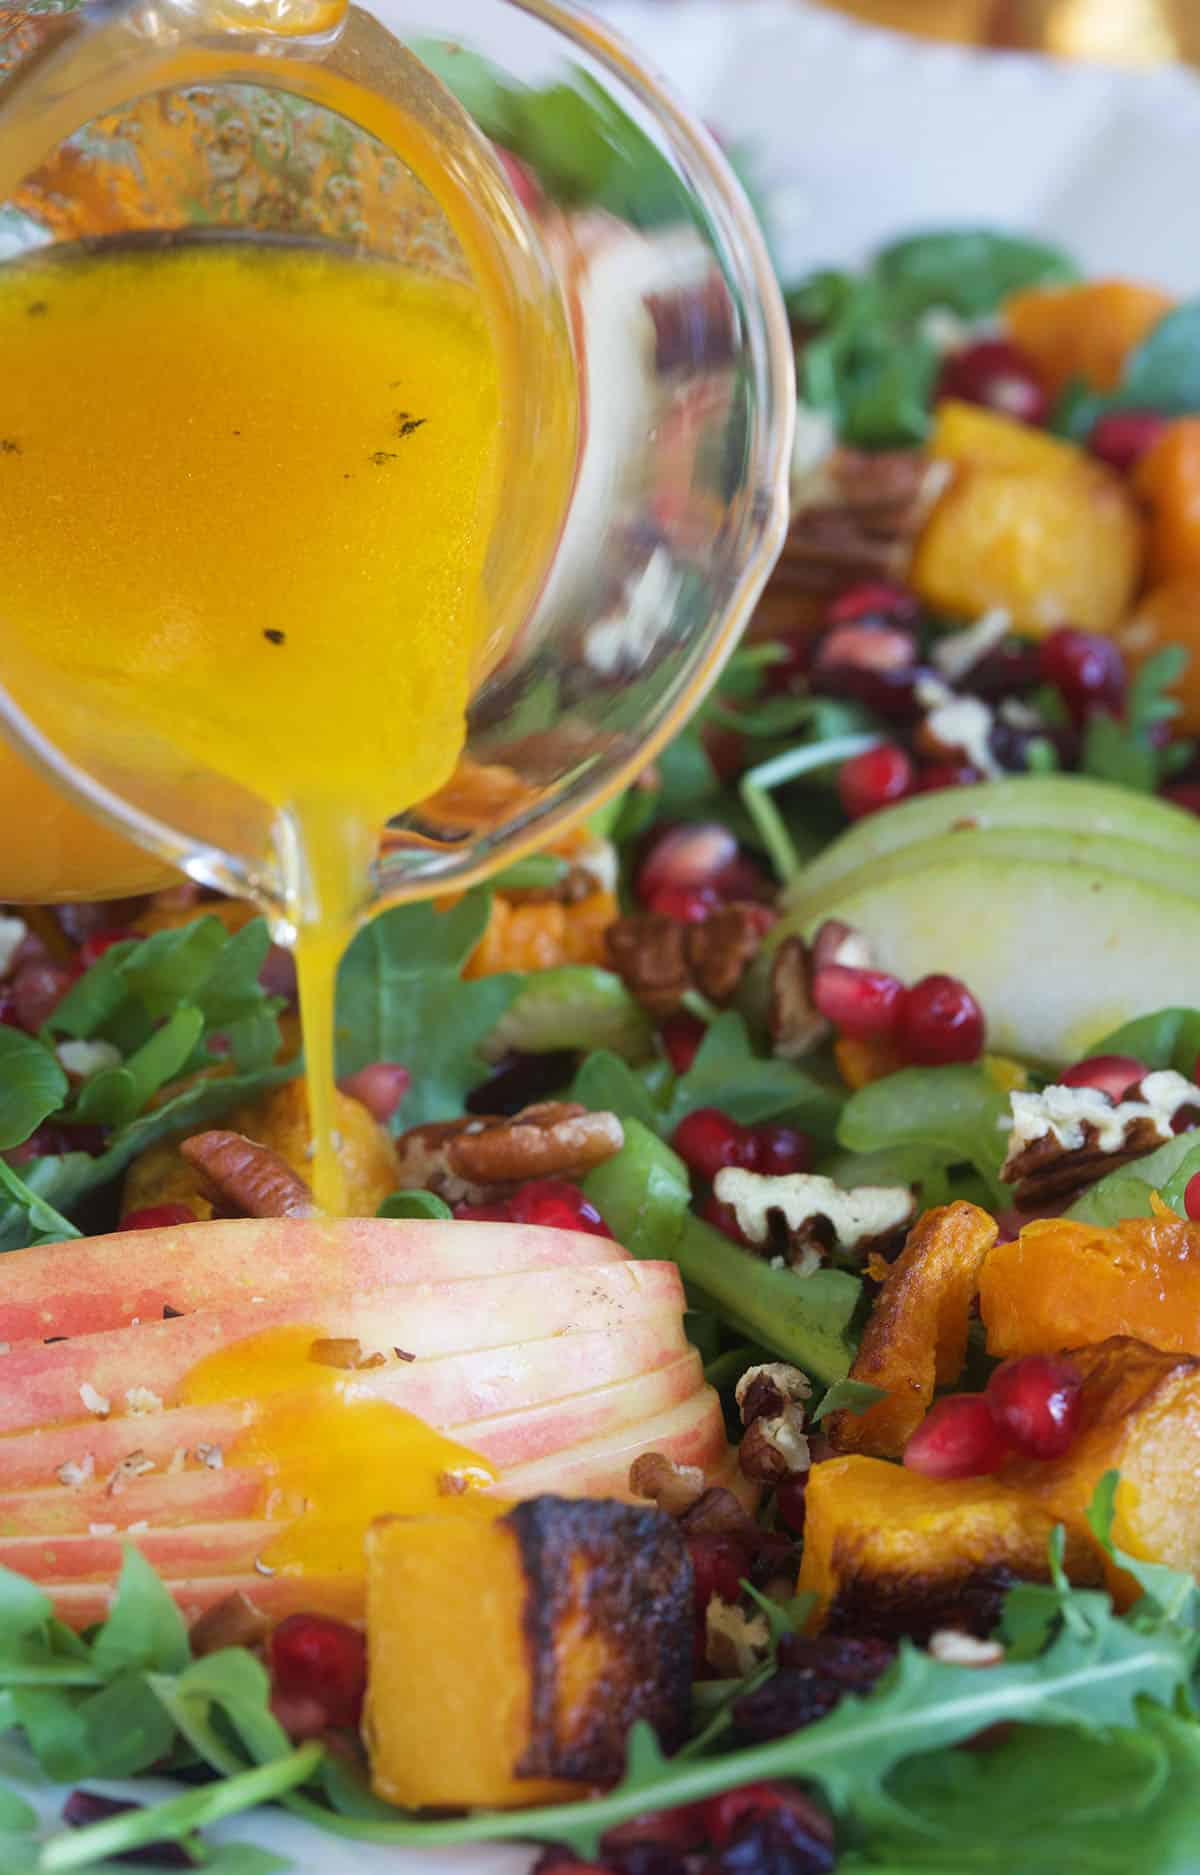 Vinaigrette is being drizzled all over a salad.